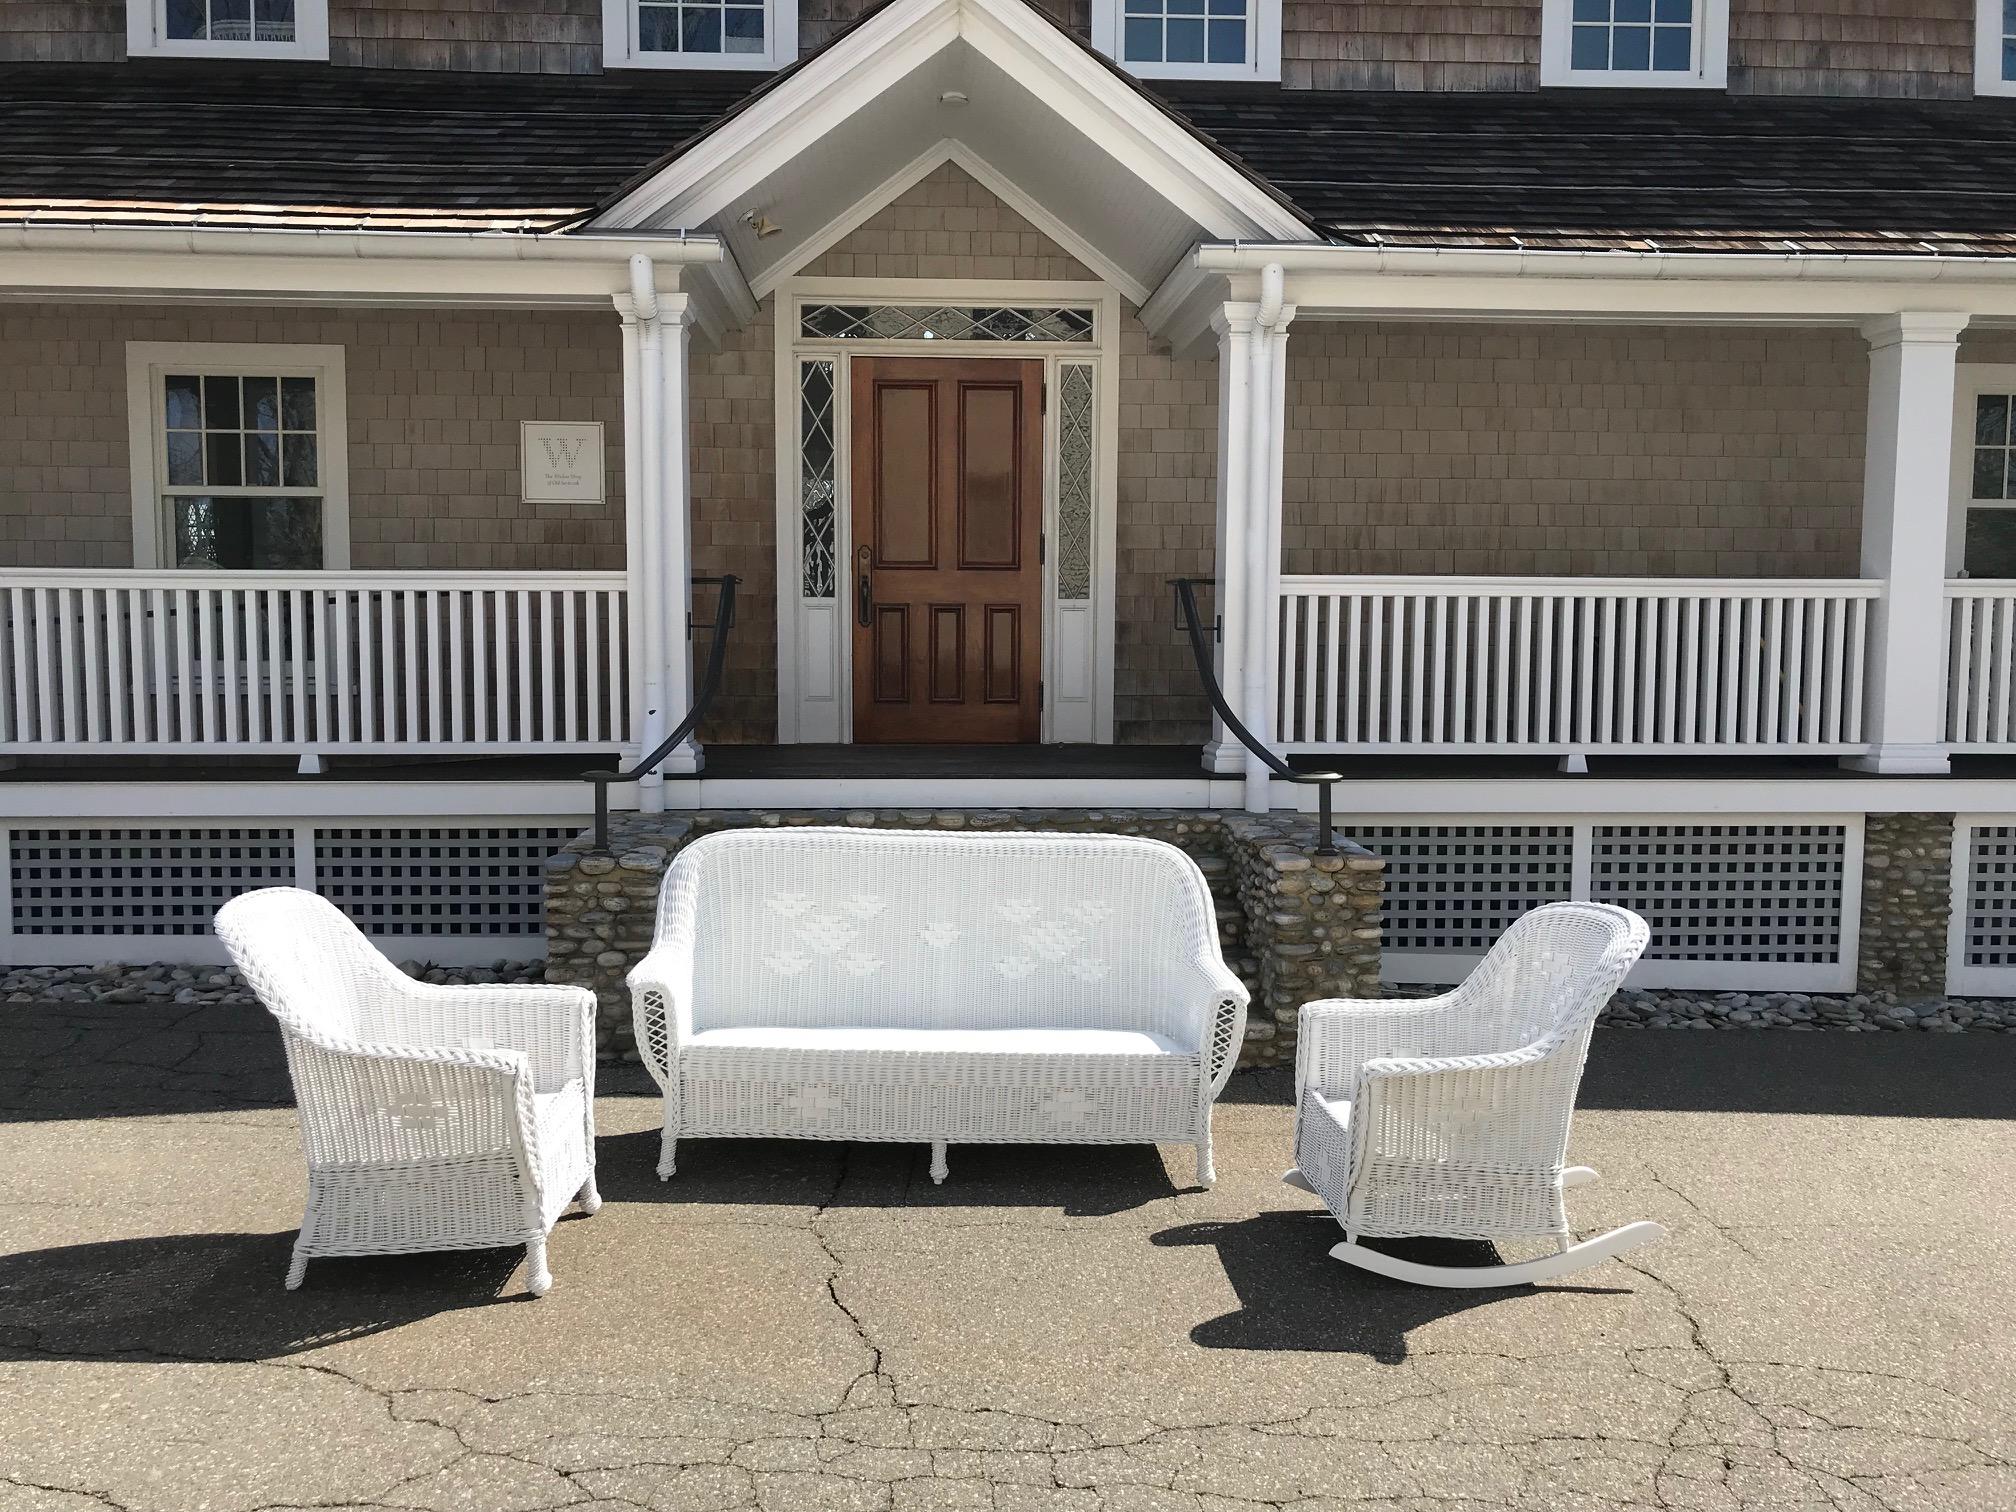 This is a classic antique Heywood Wakefield Wicker set from the 1920s in fresh white paint. Additional pieces from this suite are available under separate listings. Sofa measures 74